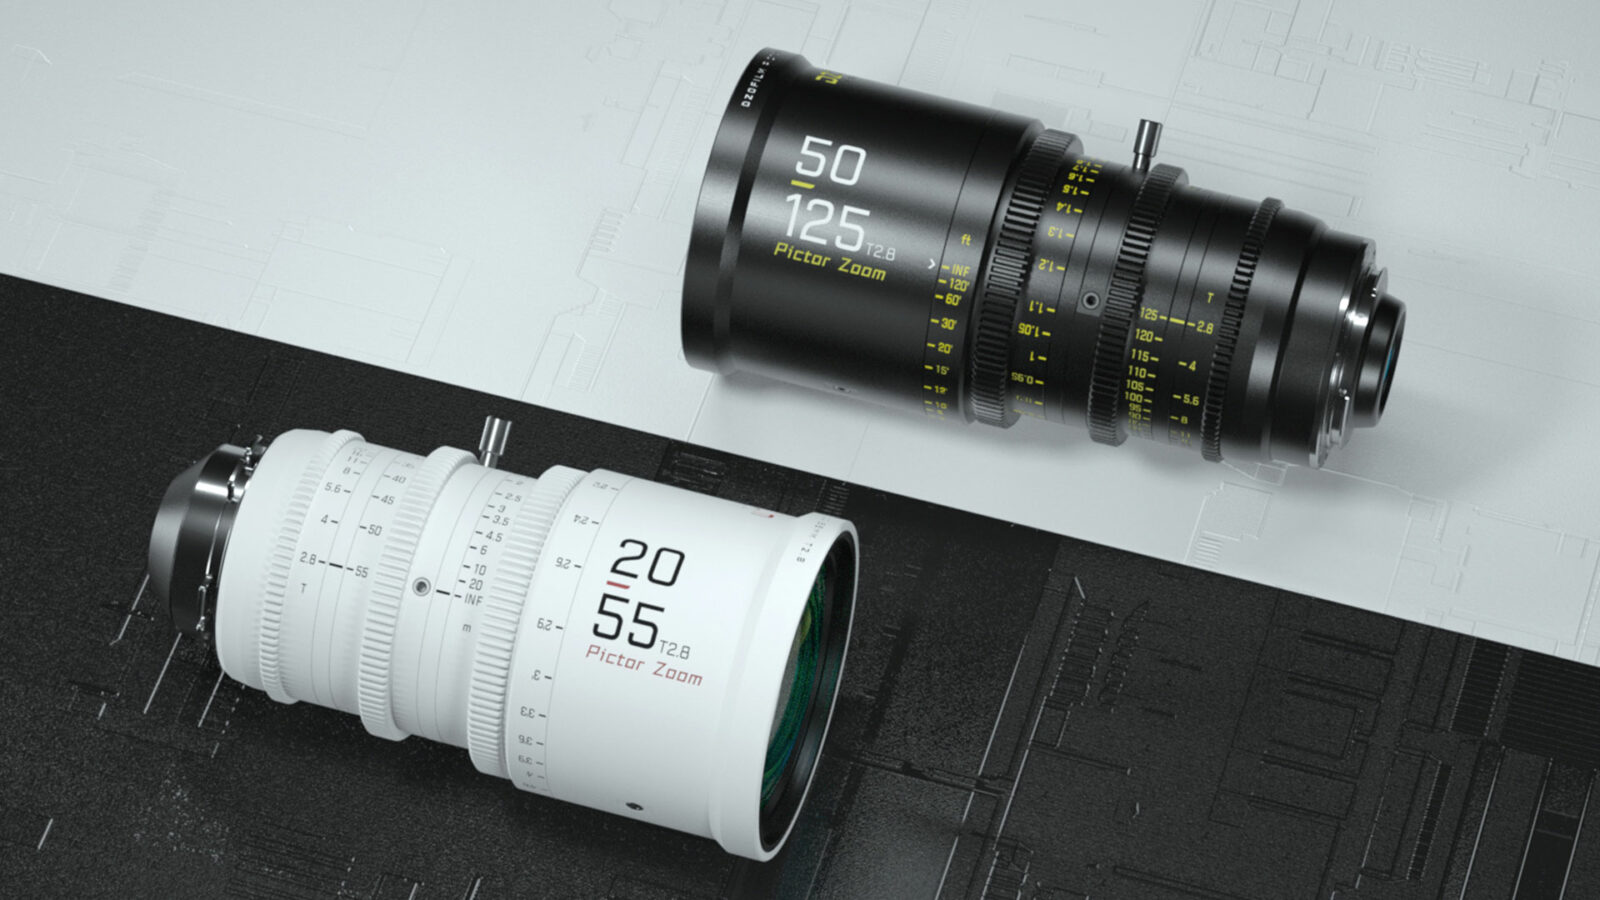 DZOFILM 20-55mm and 50-125mm T2.8 Super 35mm Zoom Lenses Introduced | CineD